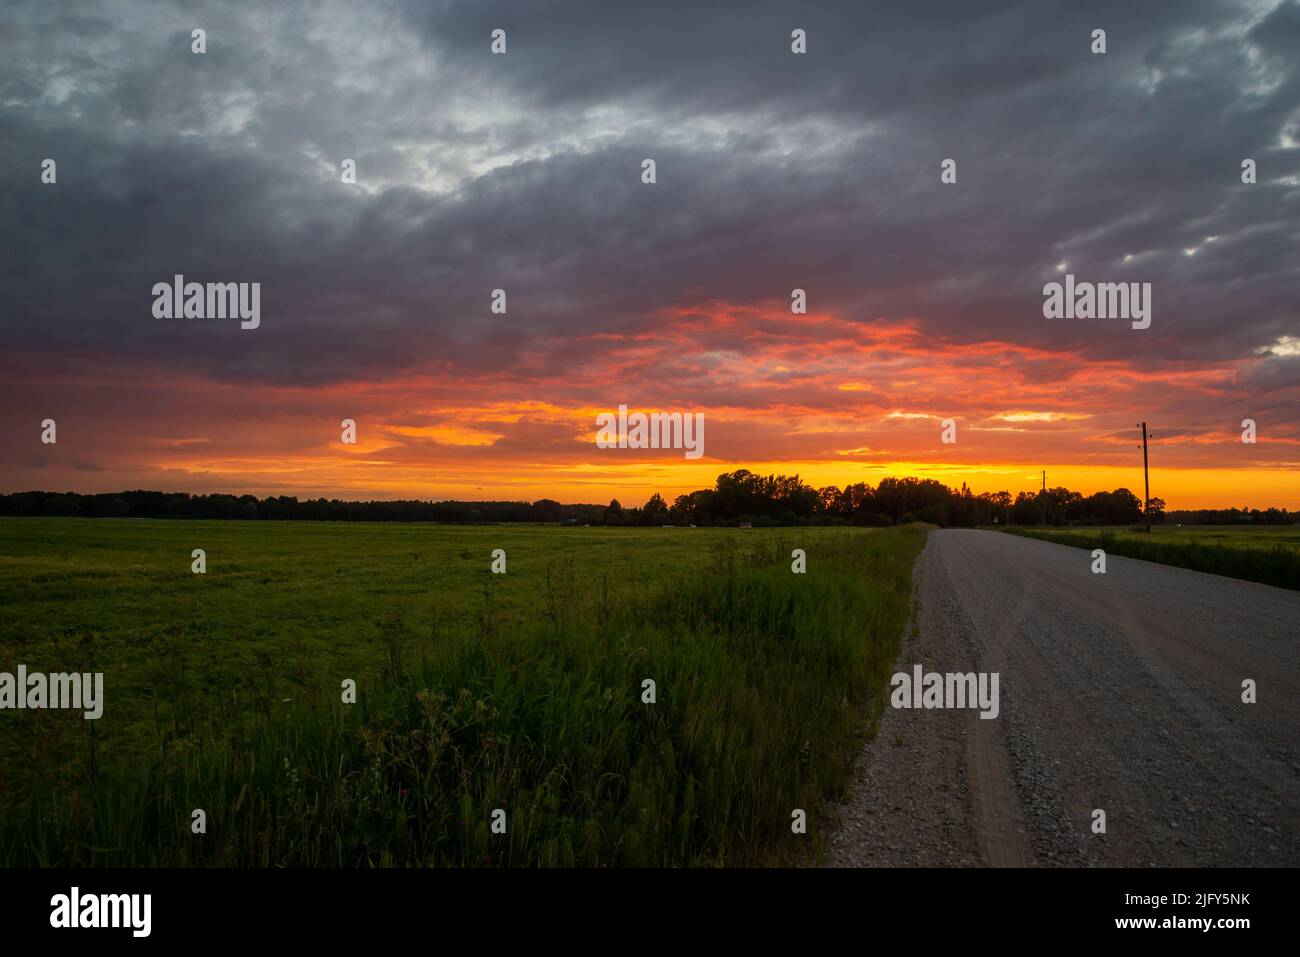 Scenic rural landscape with rural broken dirt road at sunset. Stock Photo